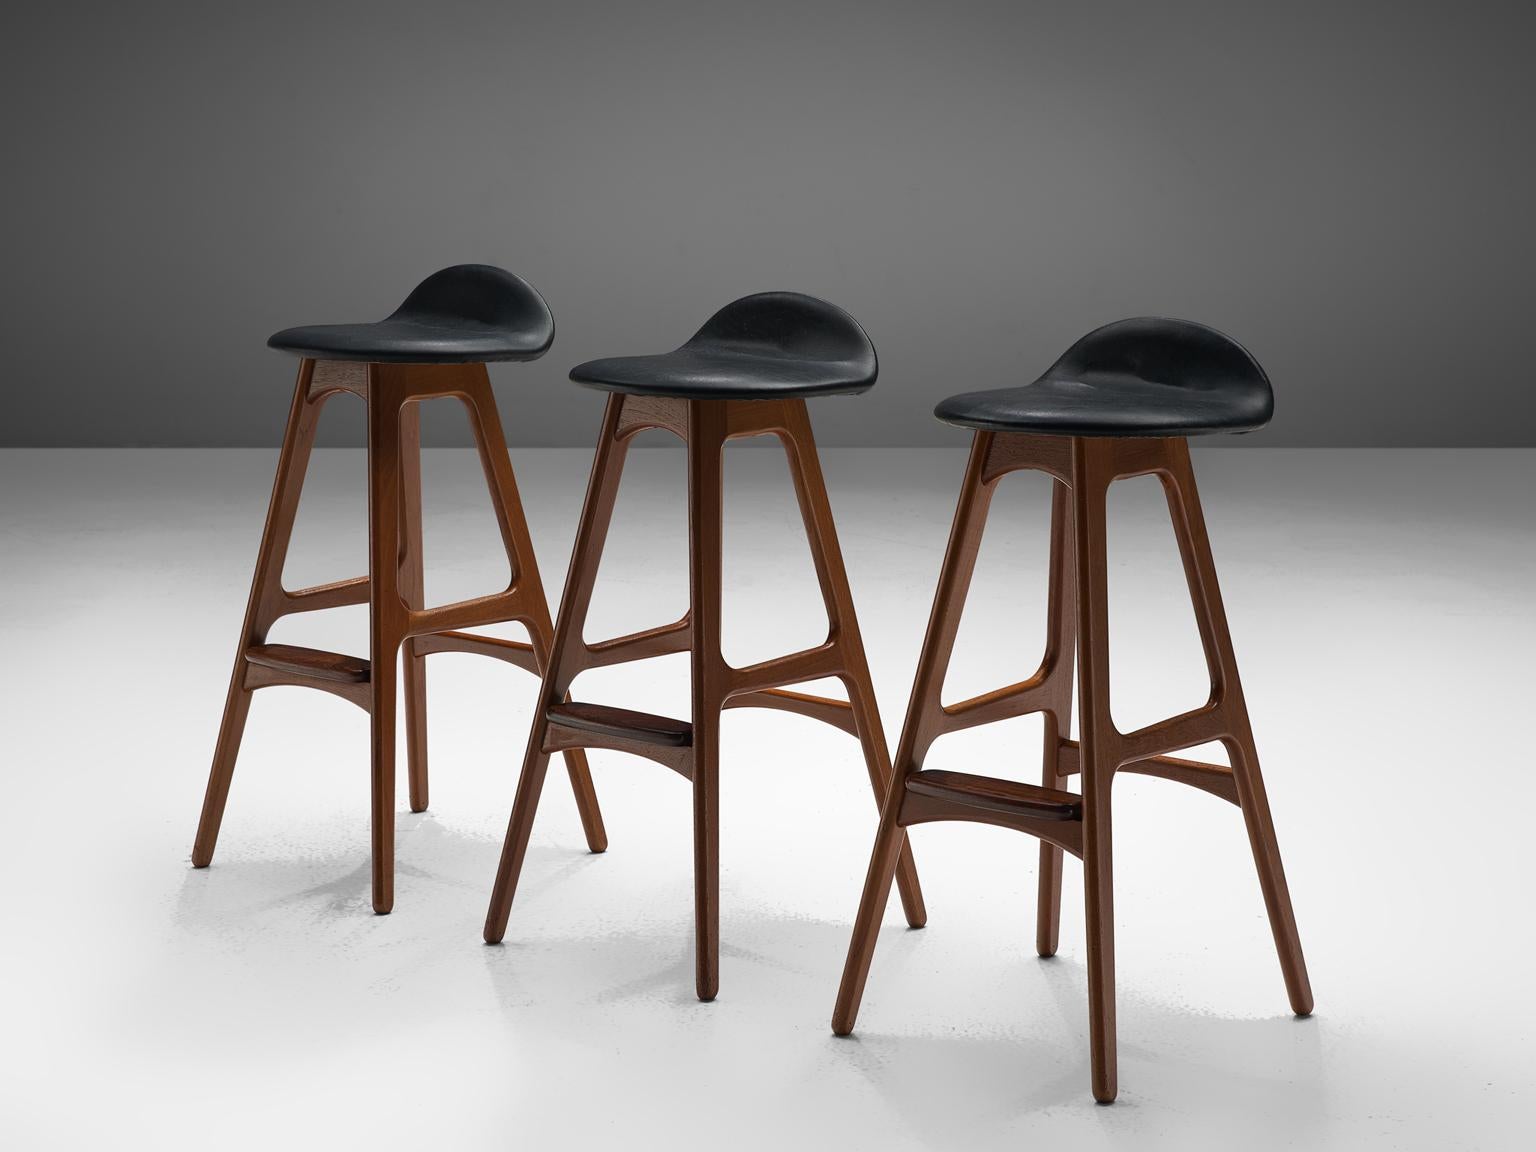 Erik Buch for O.D. Mobler, set of three bar stools, in teak and rosewood and faux leather, Denmark, circa 1960s.

Distinctive set of barstools by Erik Buch (1923-1982). The well crafted frame is in solid teak, with a foot rest in solid rosewood. A